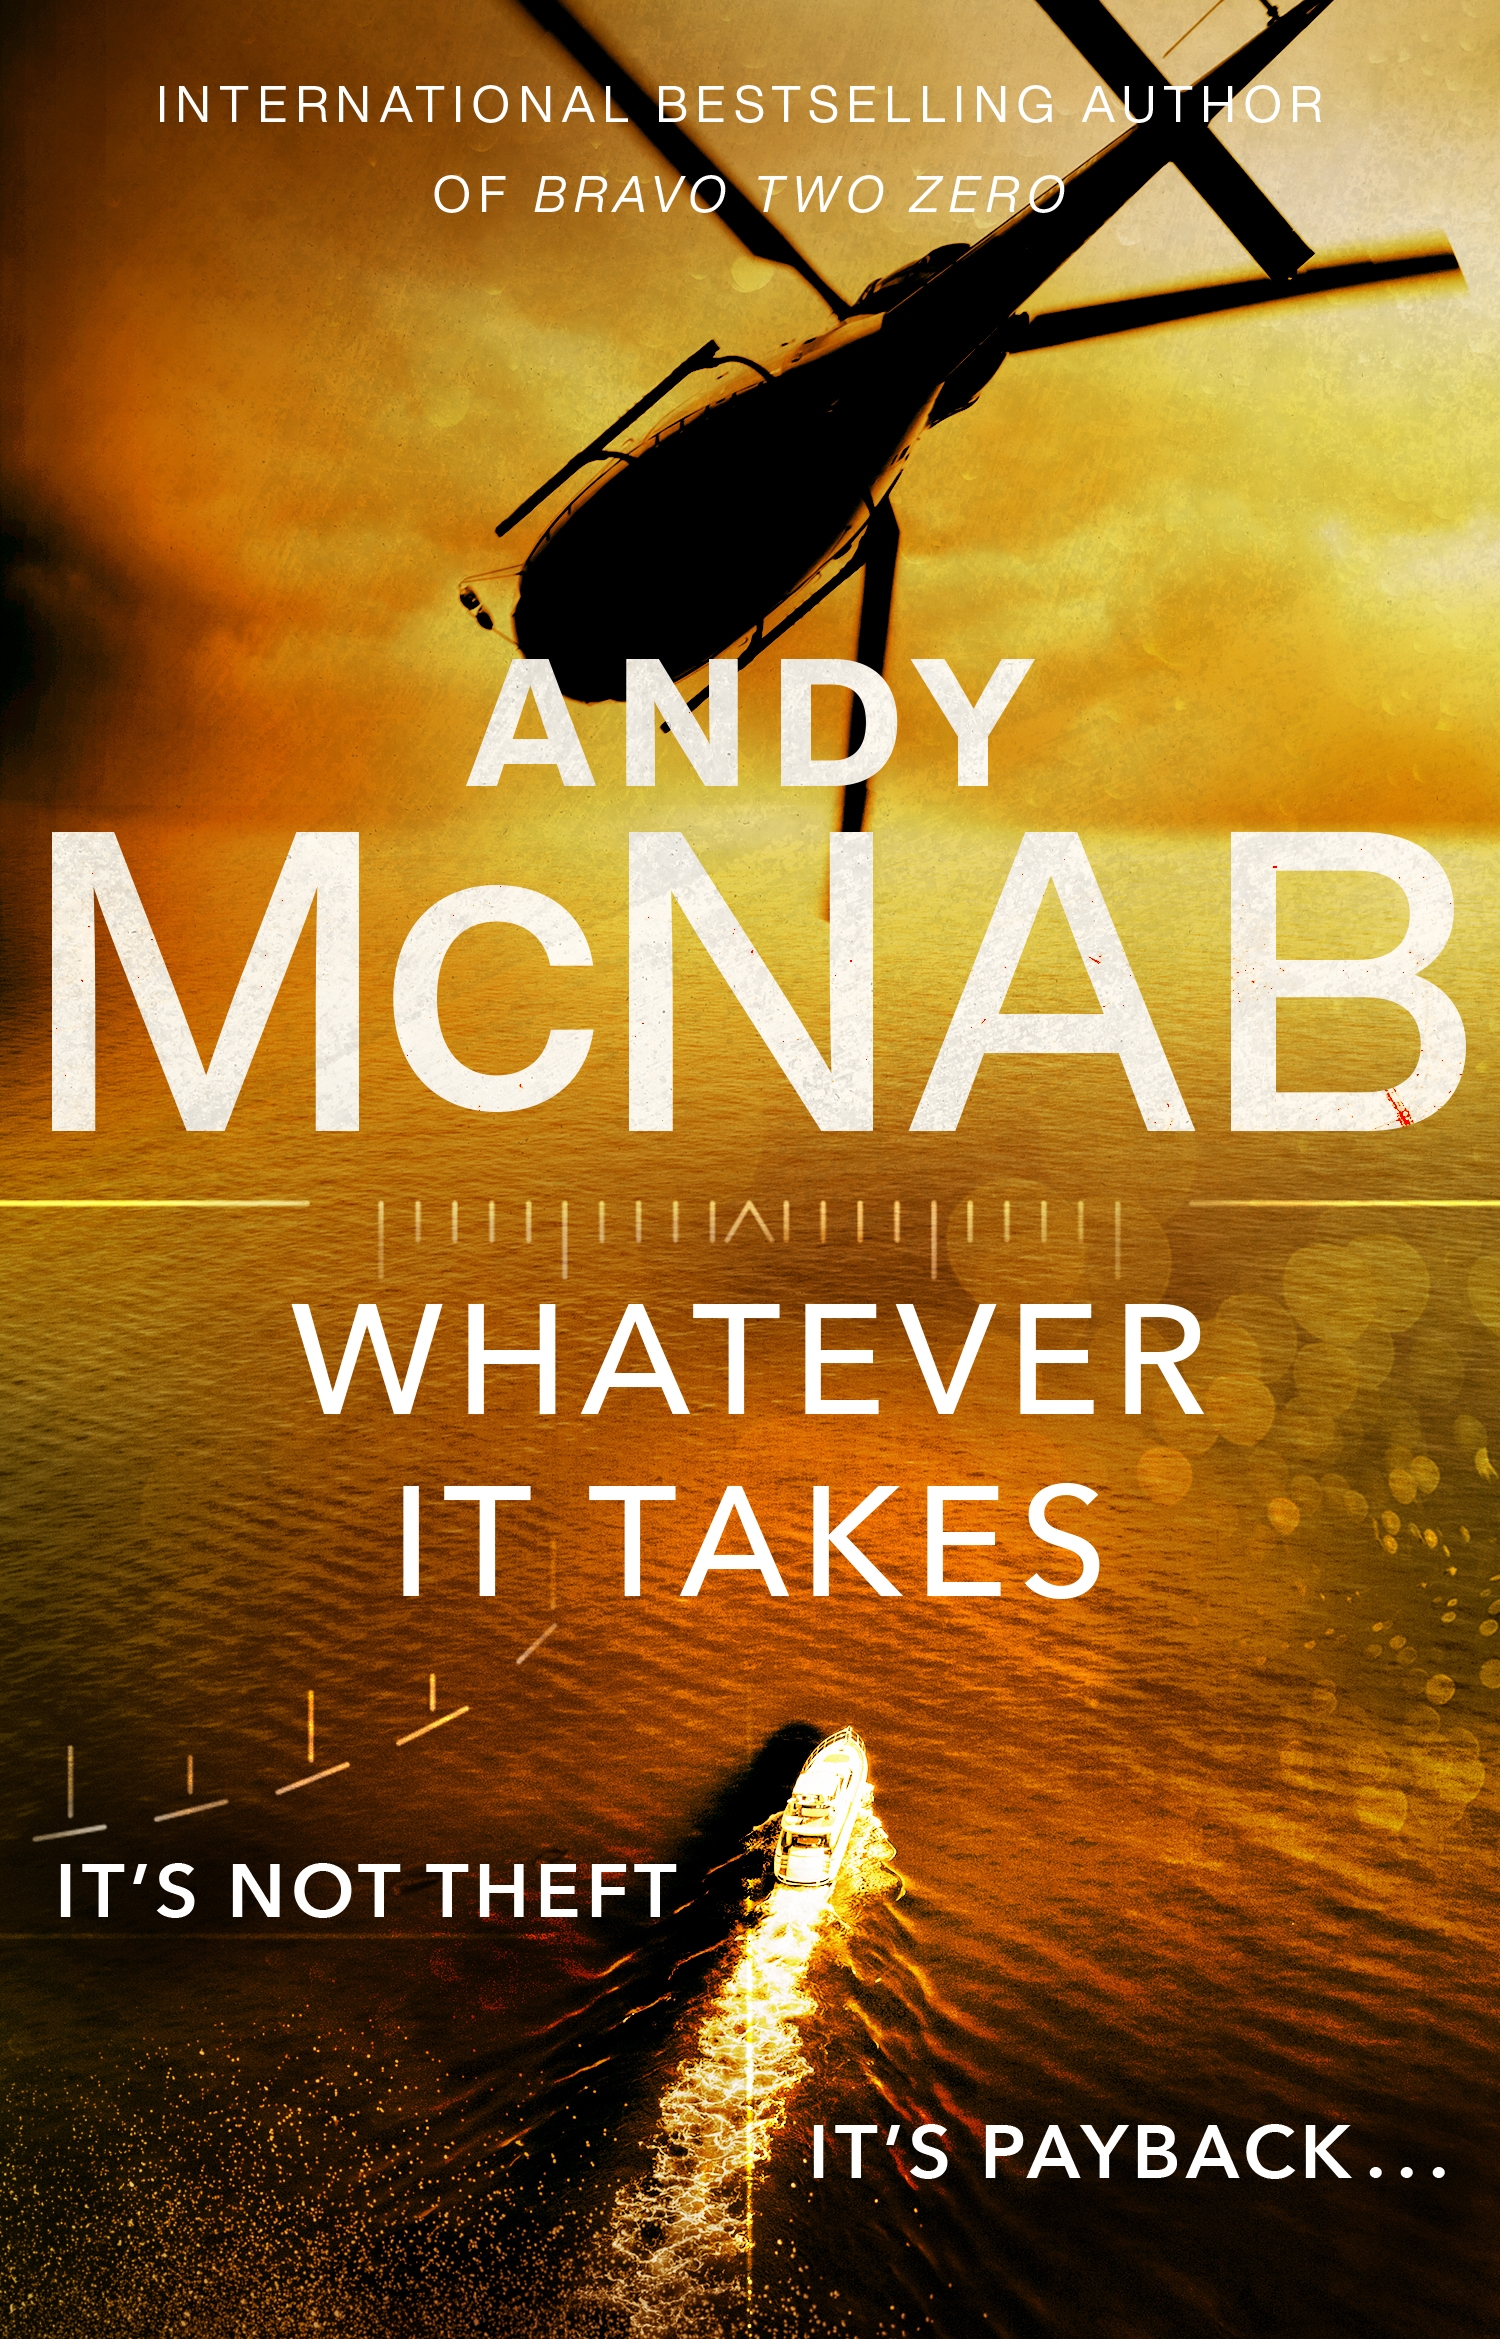 94 List Andy Mcnab Books Amazon with Best Writers